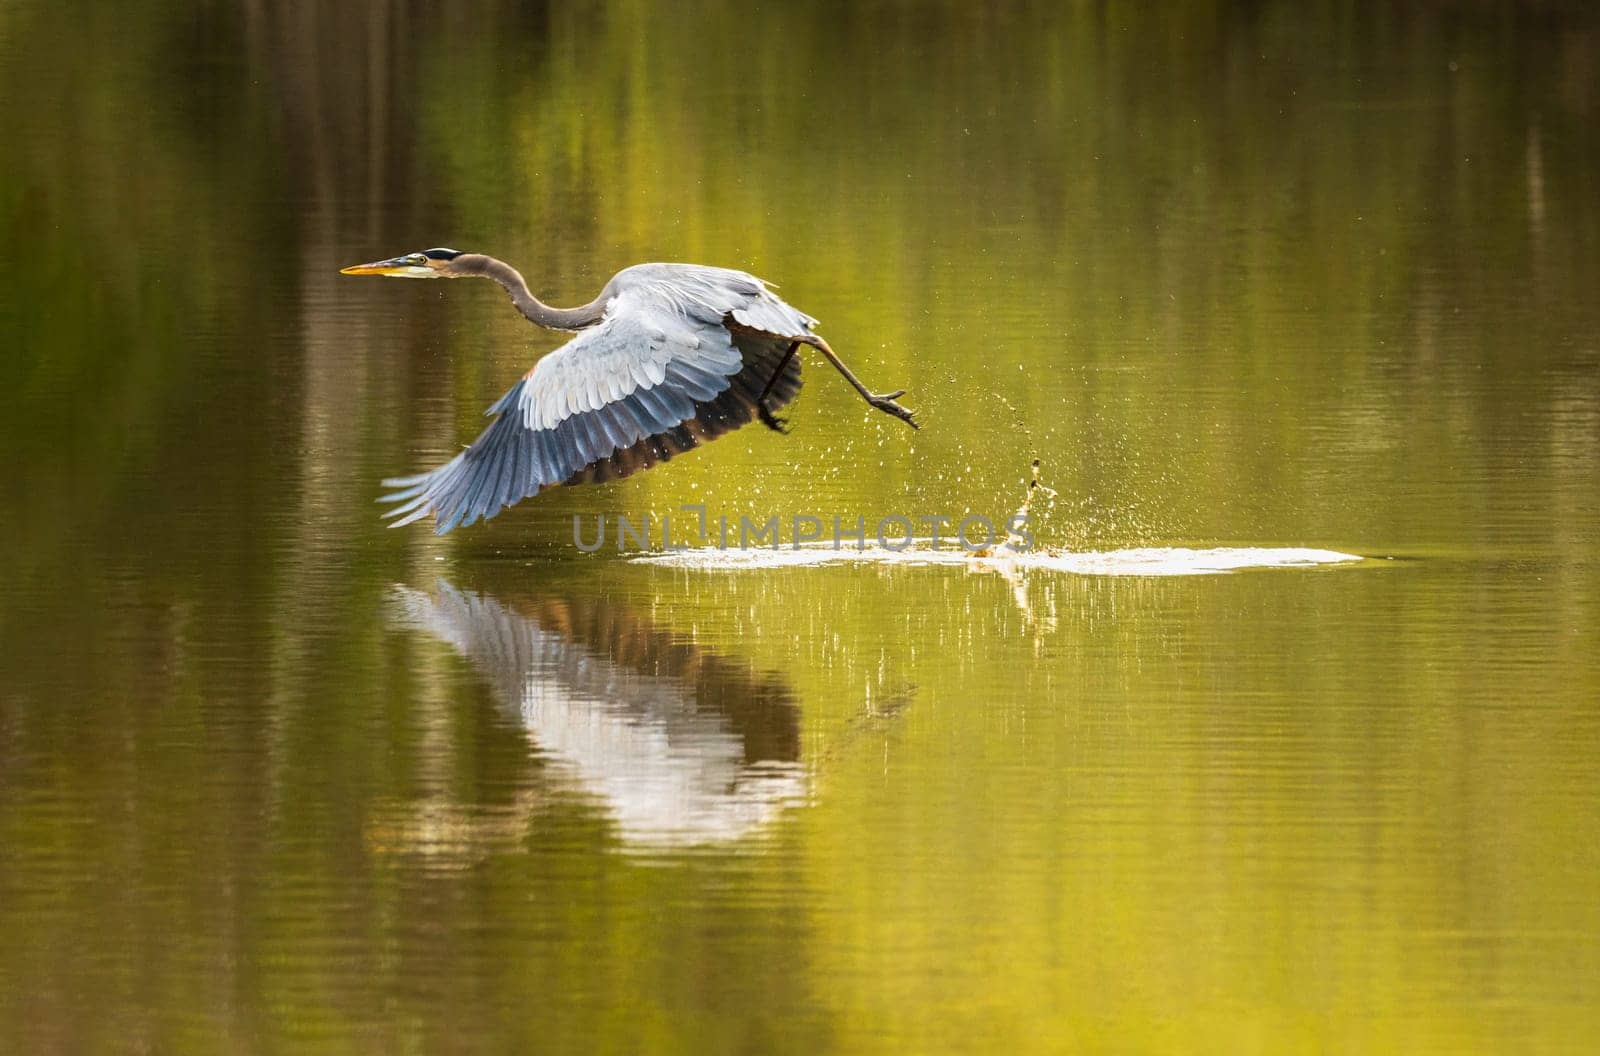 Great blue heron taking off from calm water in Atchafalaya basin by steheap